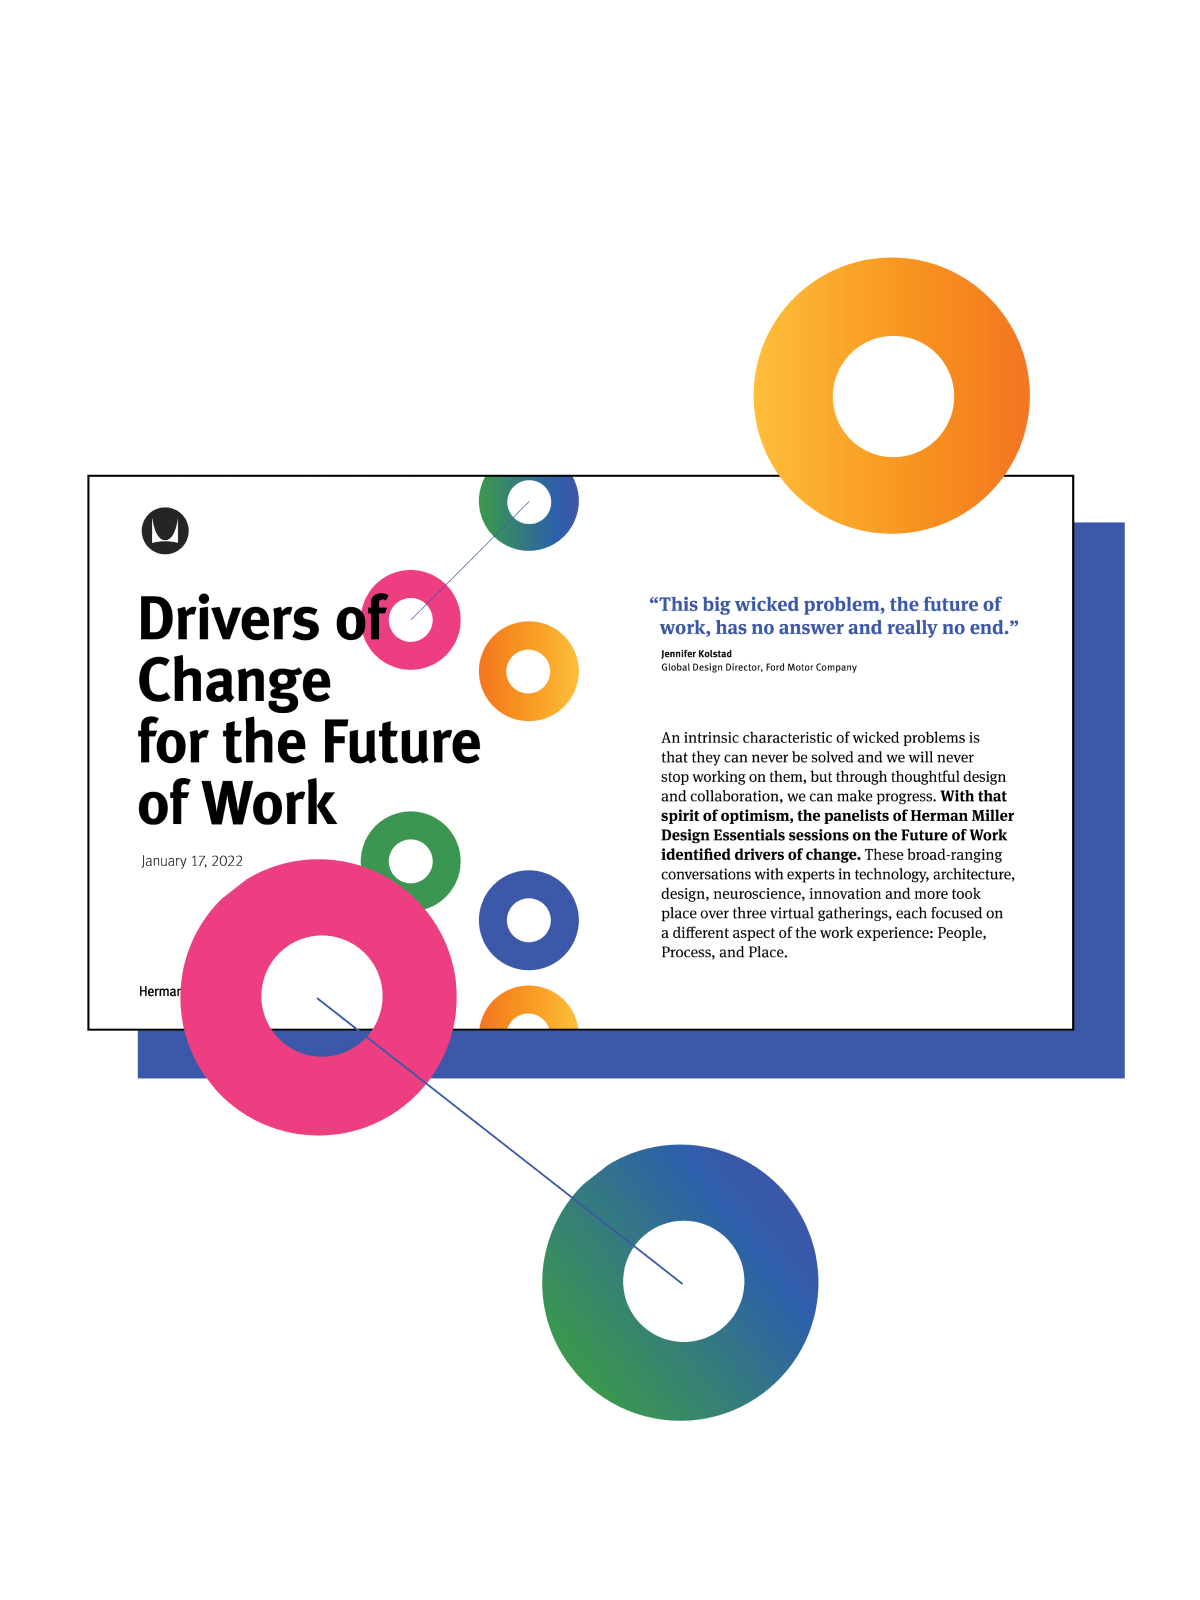 The front cover of the Drivers of Change for the Future of Work report, highlighting the drivers of change identified by the panelists of Herman Miller’s Design Essentials program.